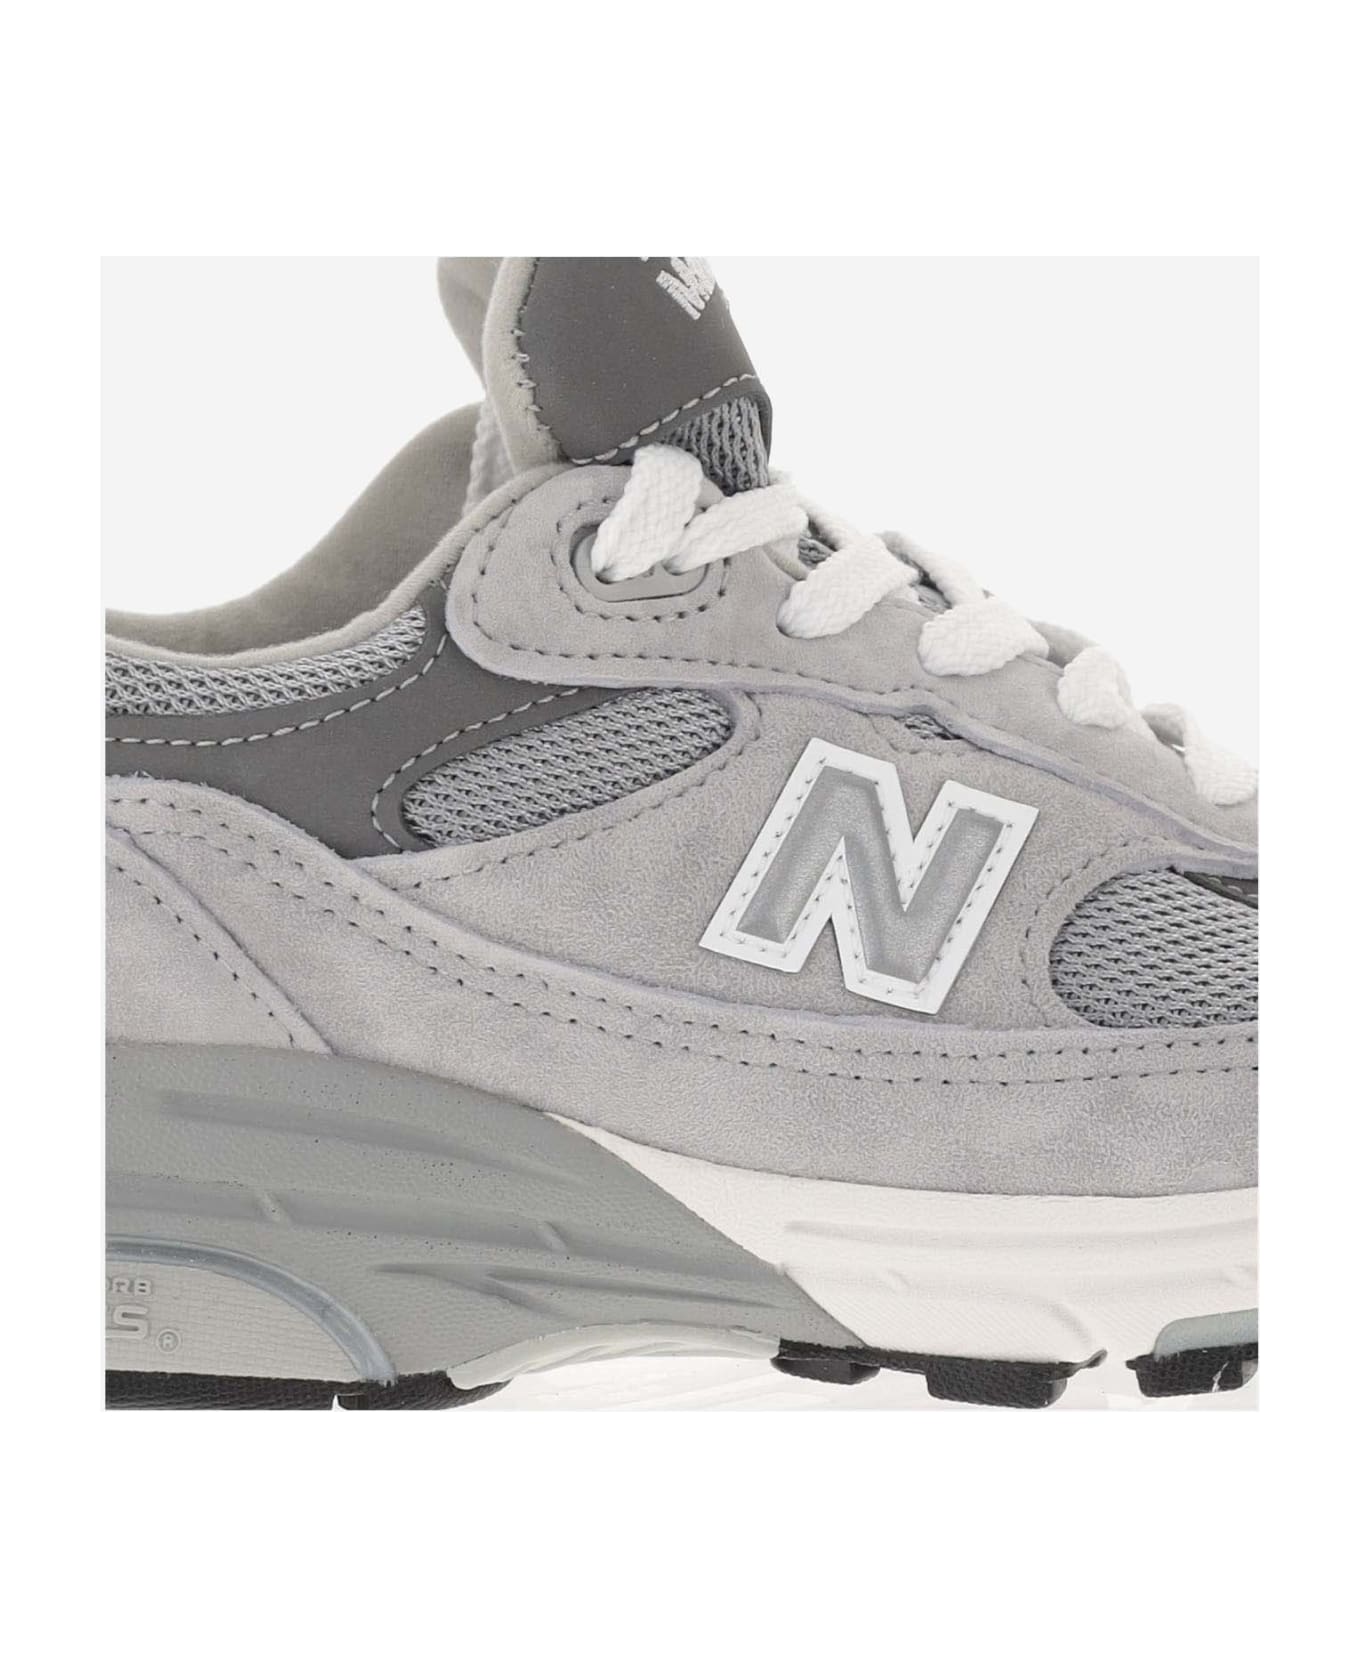 New Balance Sneakers New Balance Made In Usa 993 Core - Grey